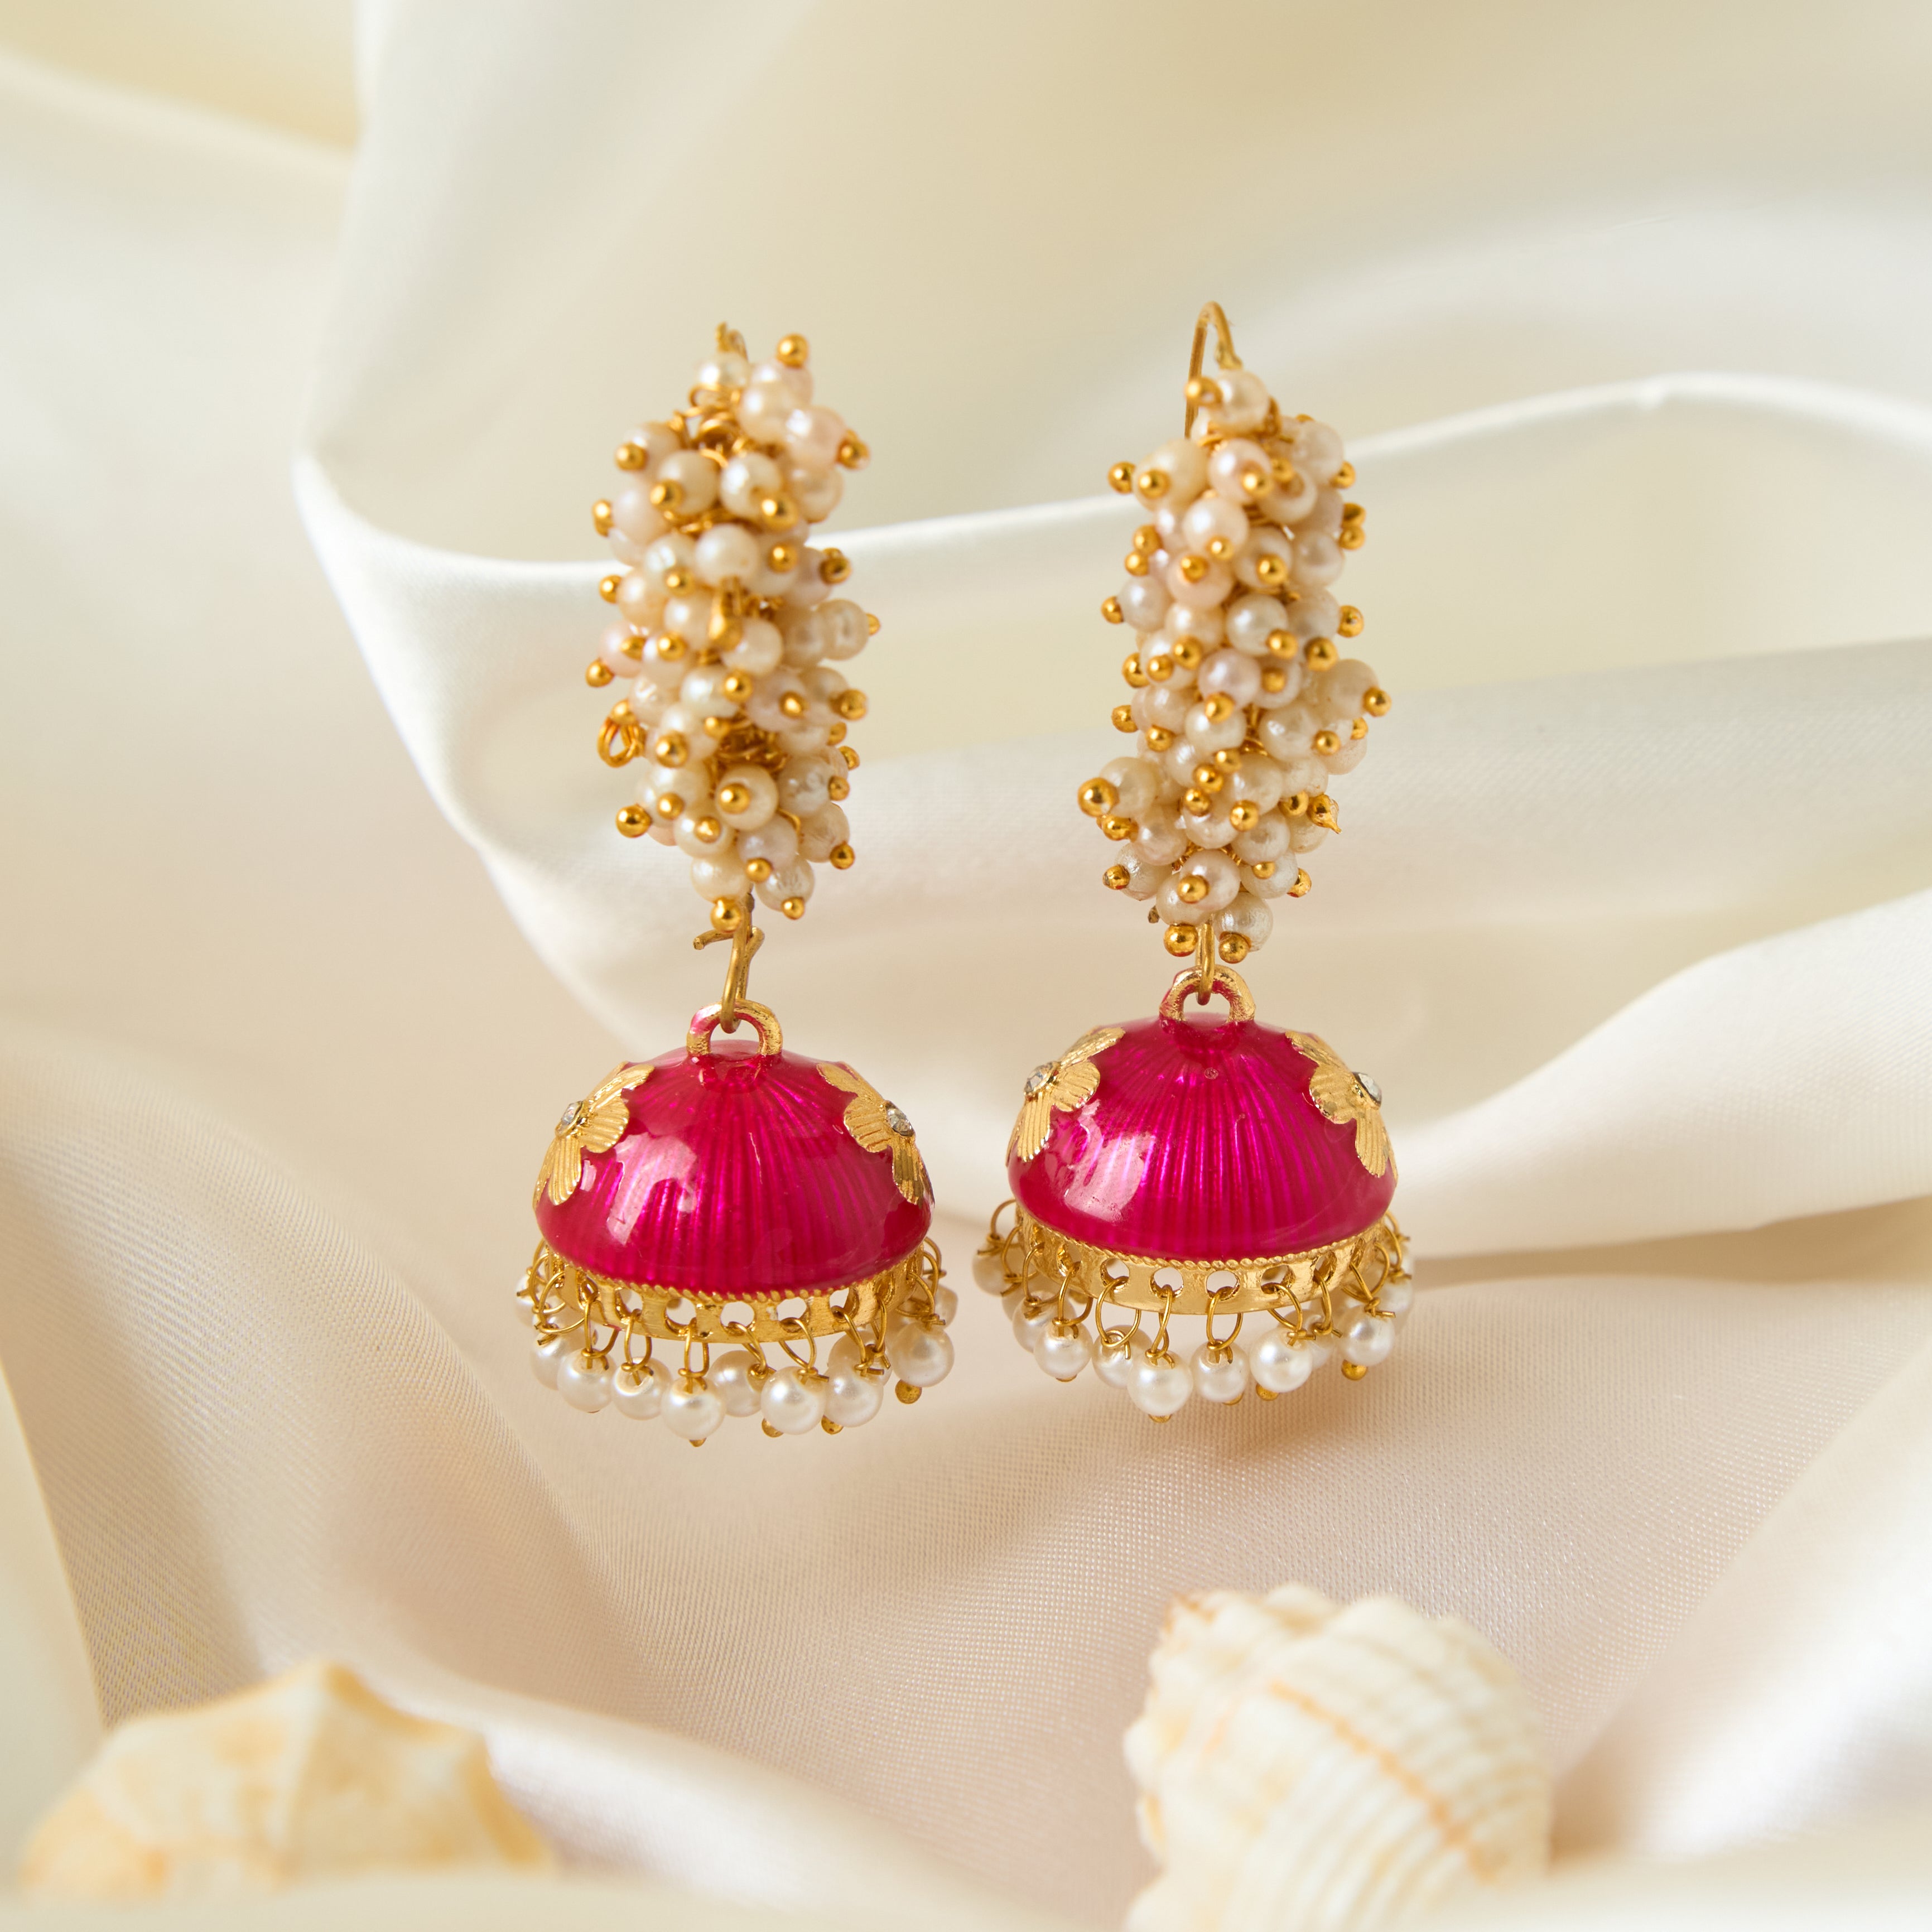 Best Handmade Mina Jhumka Earrings in Peach with Gold Color